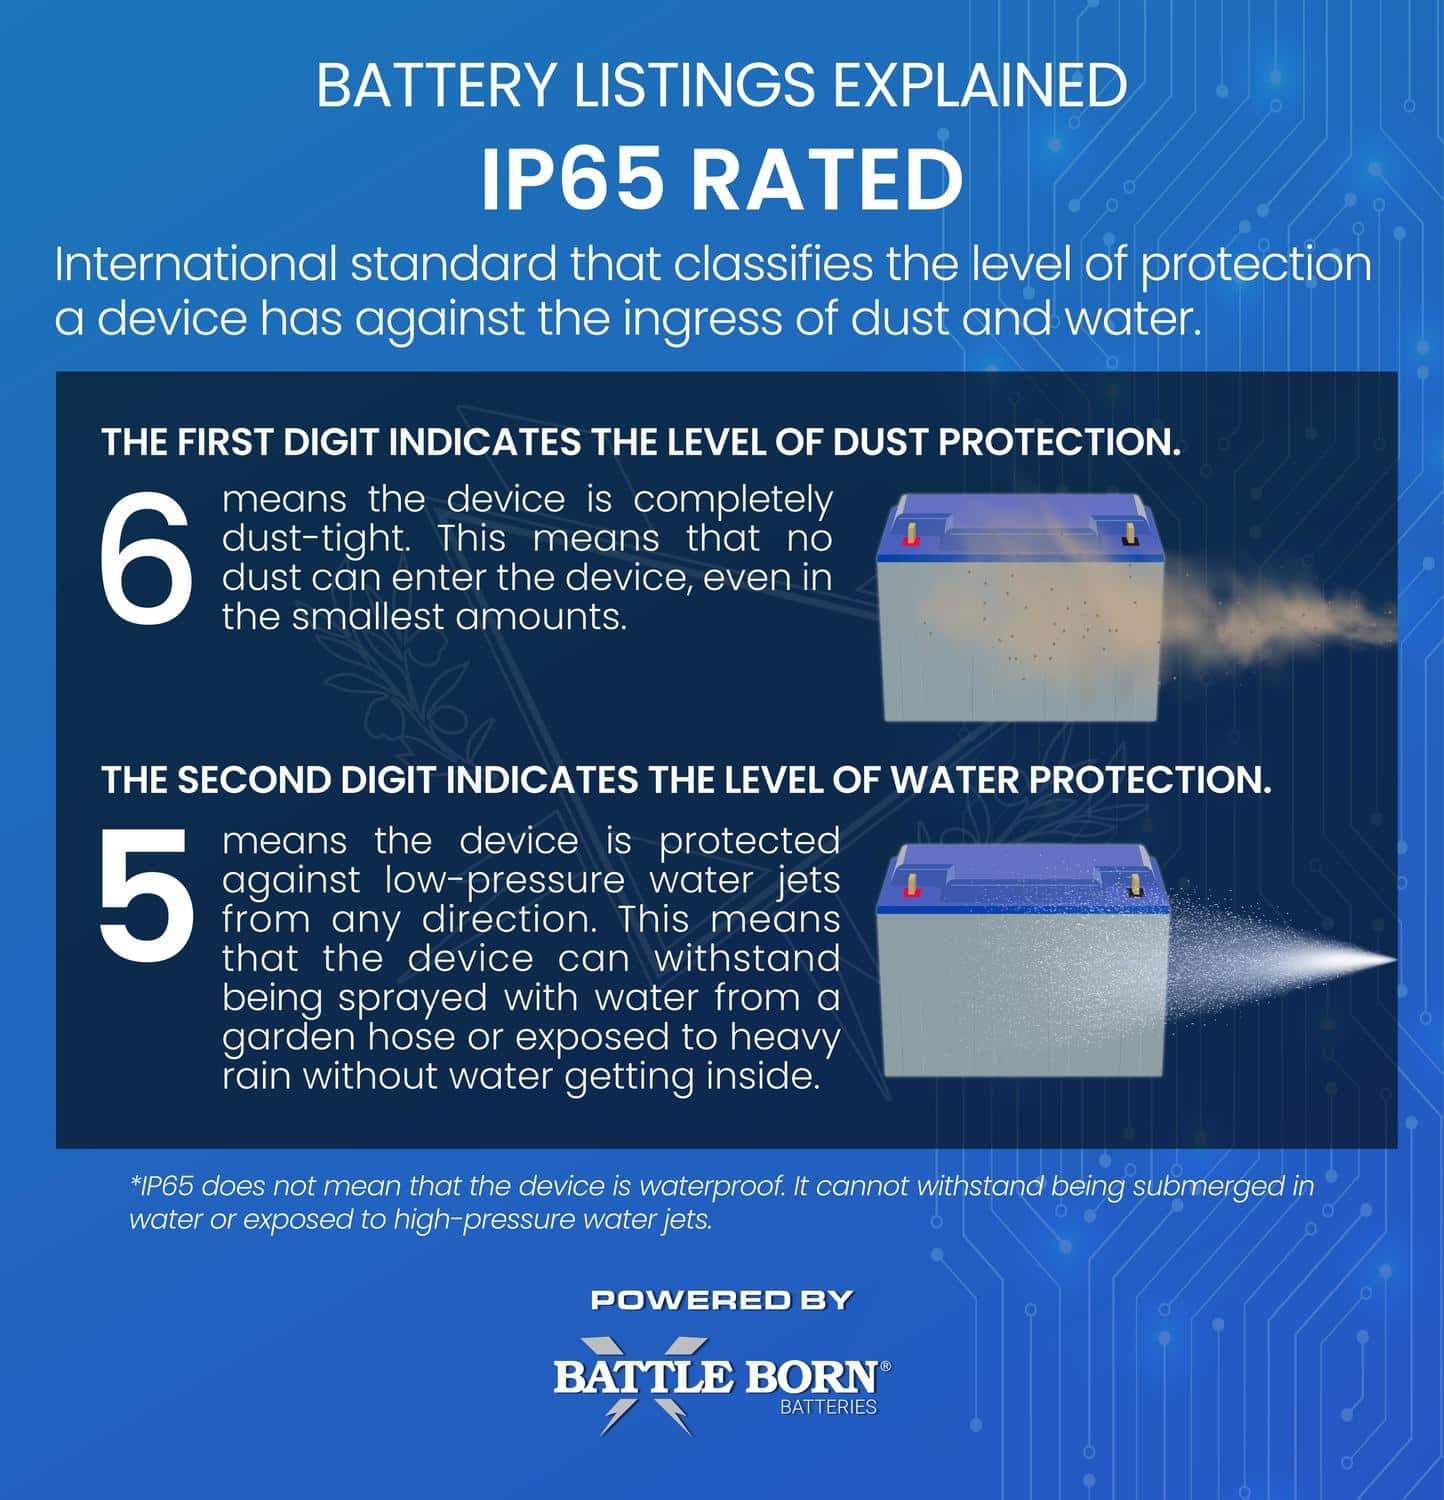 IP65 Safety Certification for Battle Born Batteries